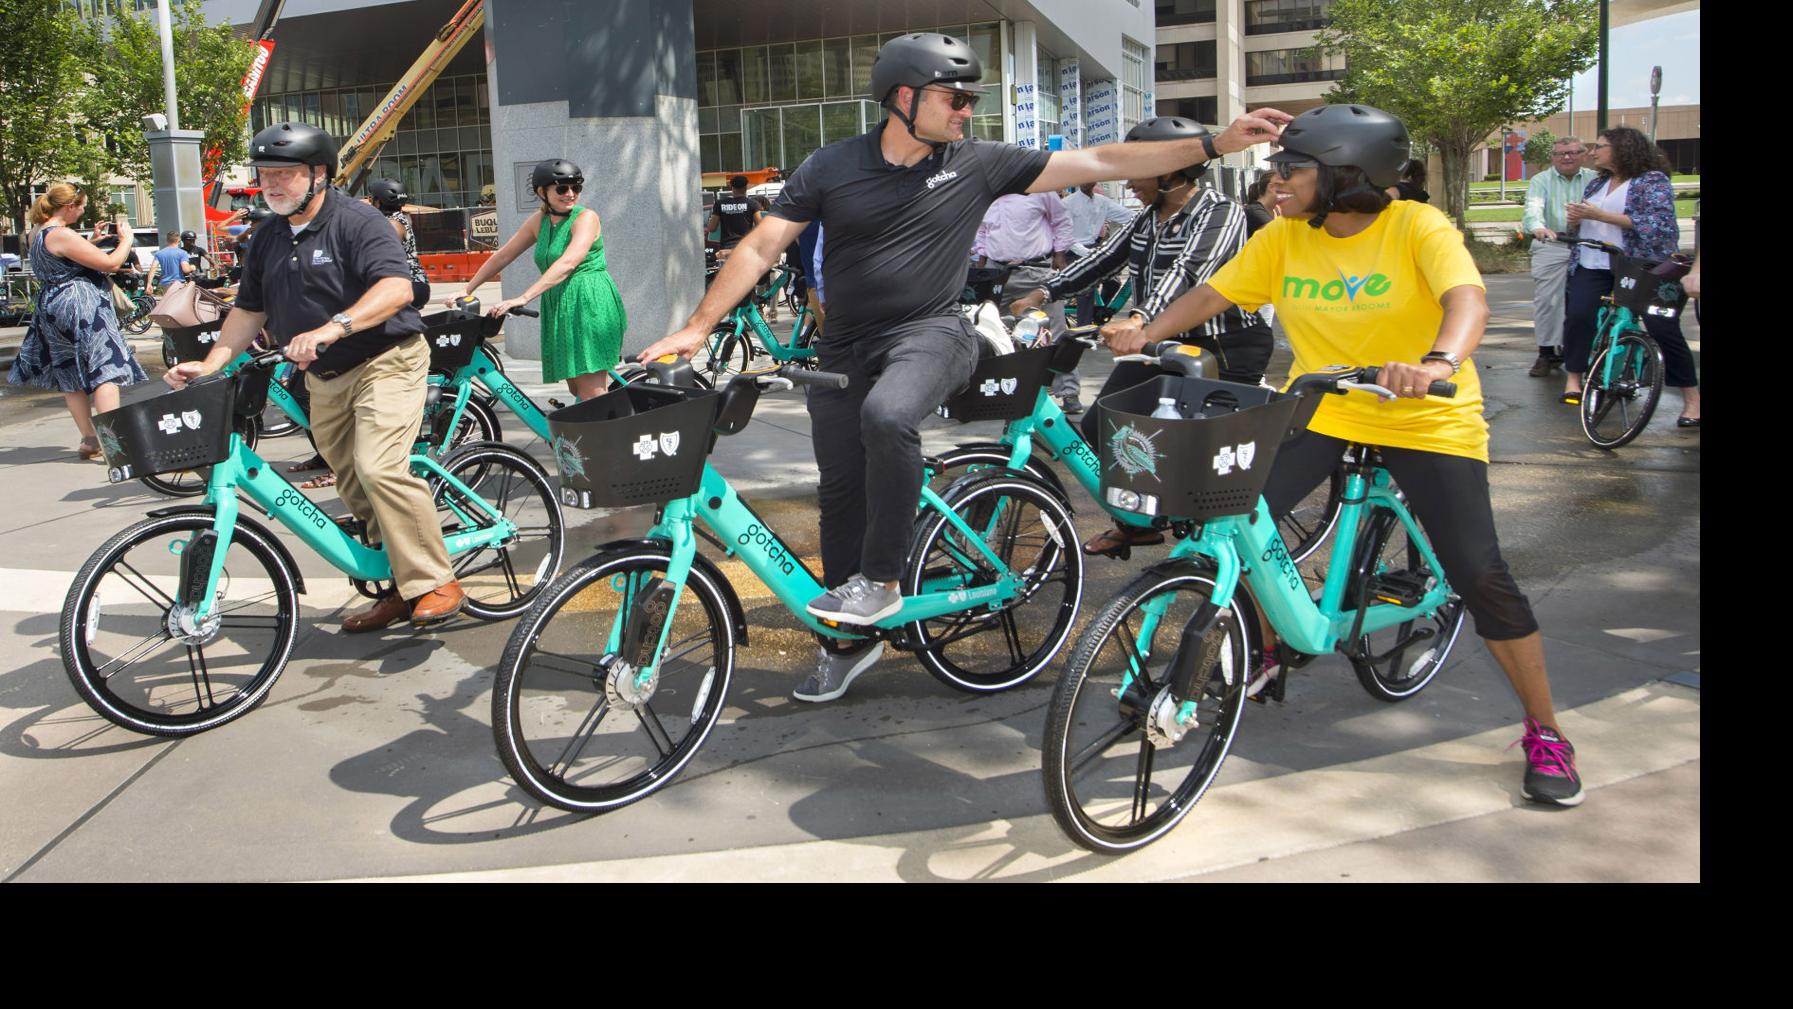 Photos: Program & ride serve as official kickoff for Baton Rouge's new Gotcha bike-sharing system